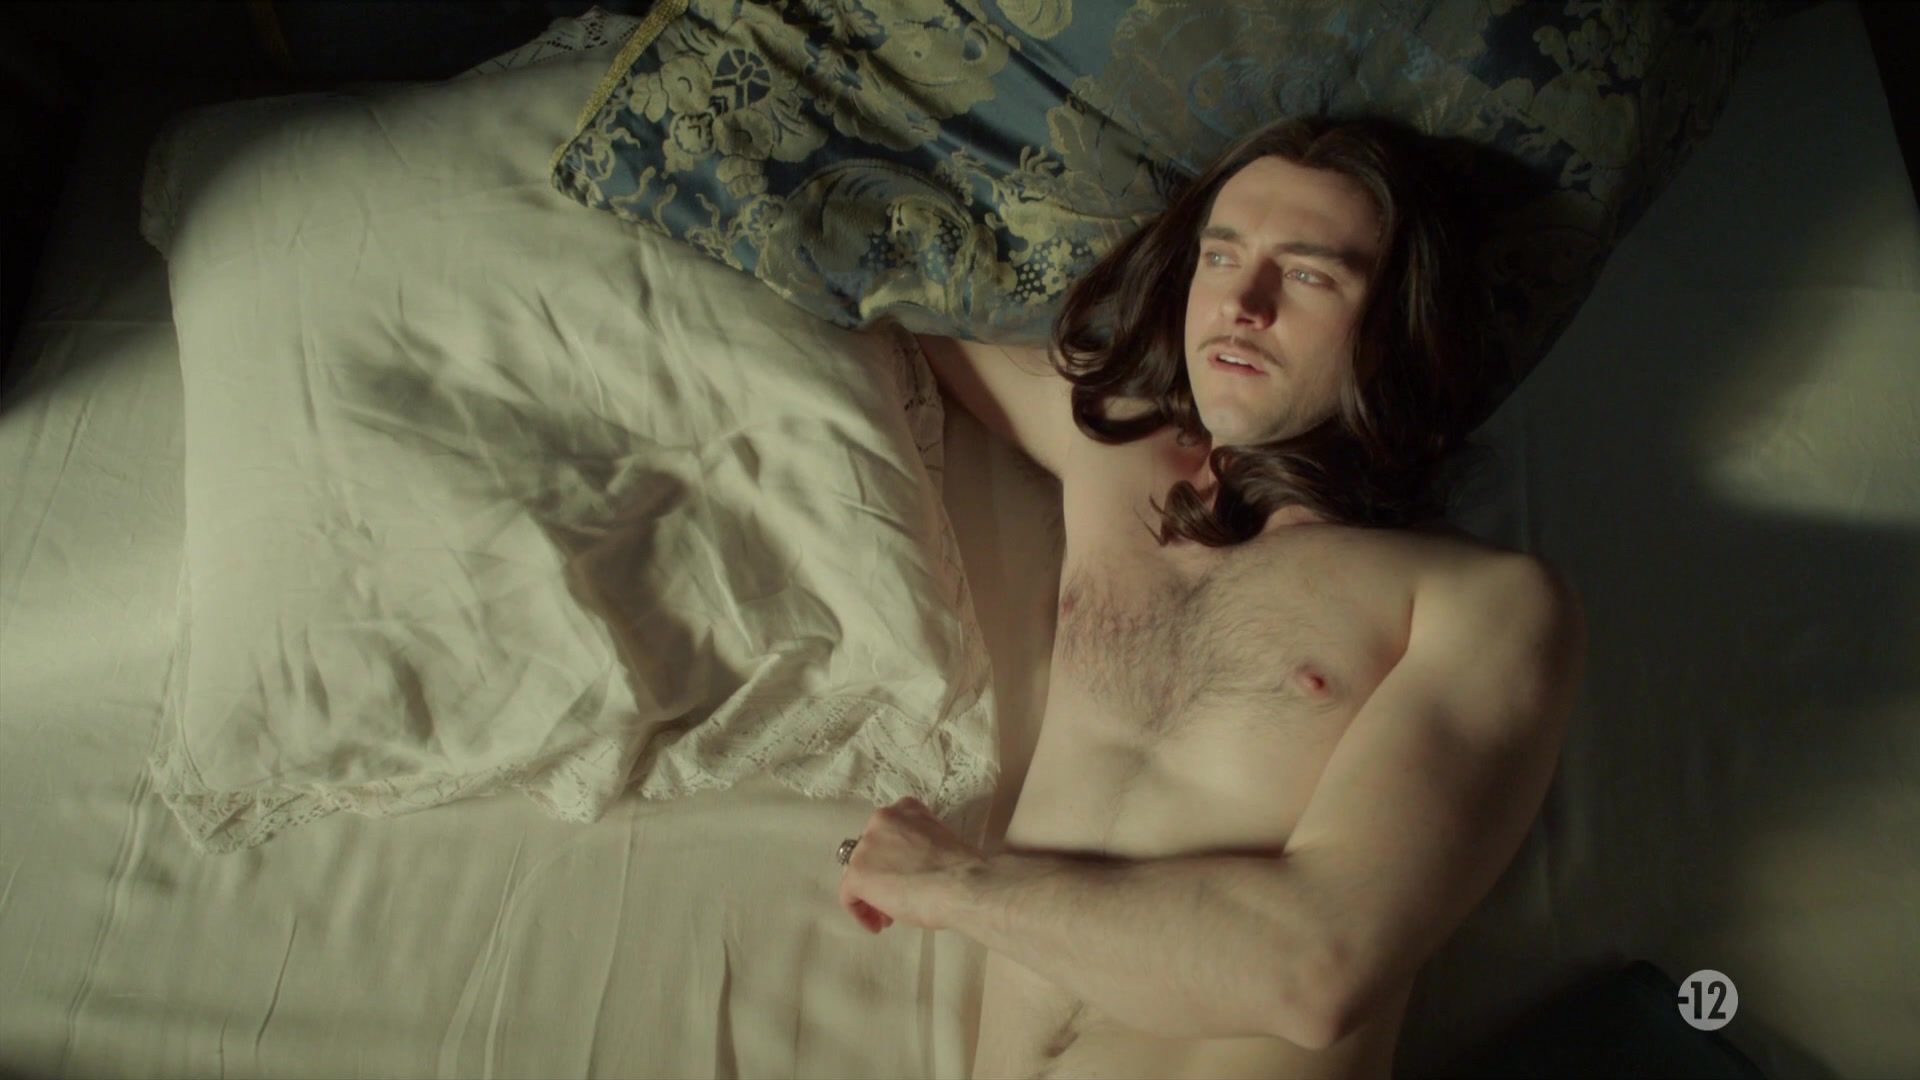 Pussy To Mouth Pregnant Sex Anna Brewster - Versailles s02e01 (2017) Oil - 1